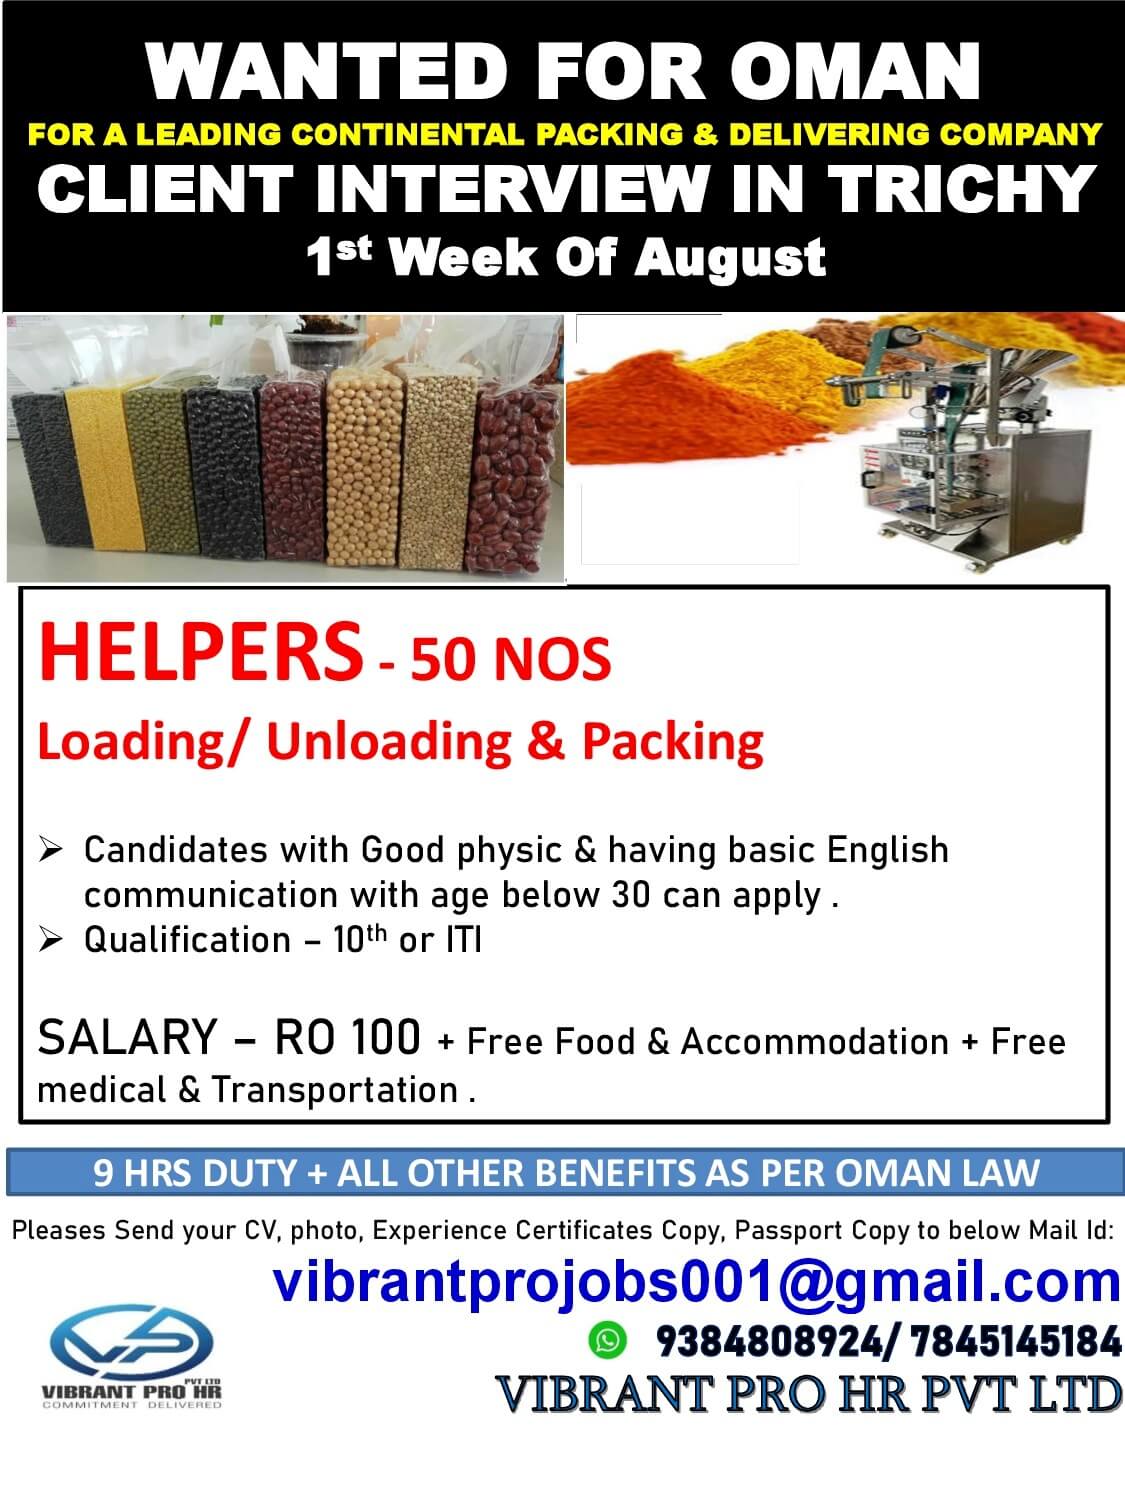 WANTED FOR OMAN- CLIENT INTERVIEW IN TRICHY